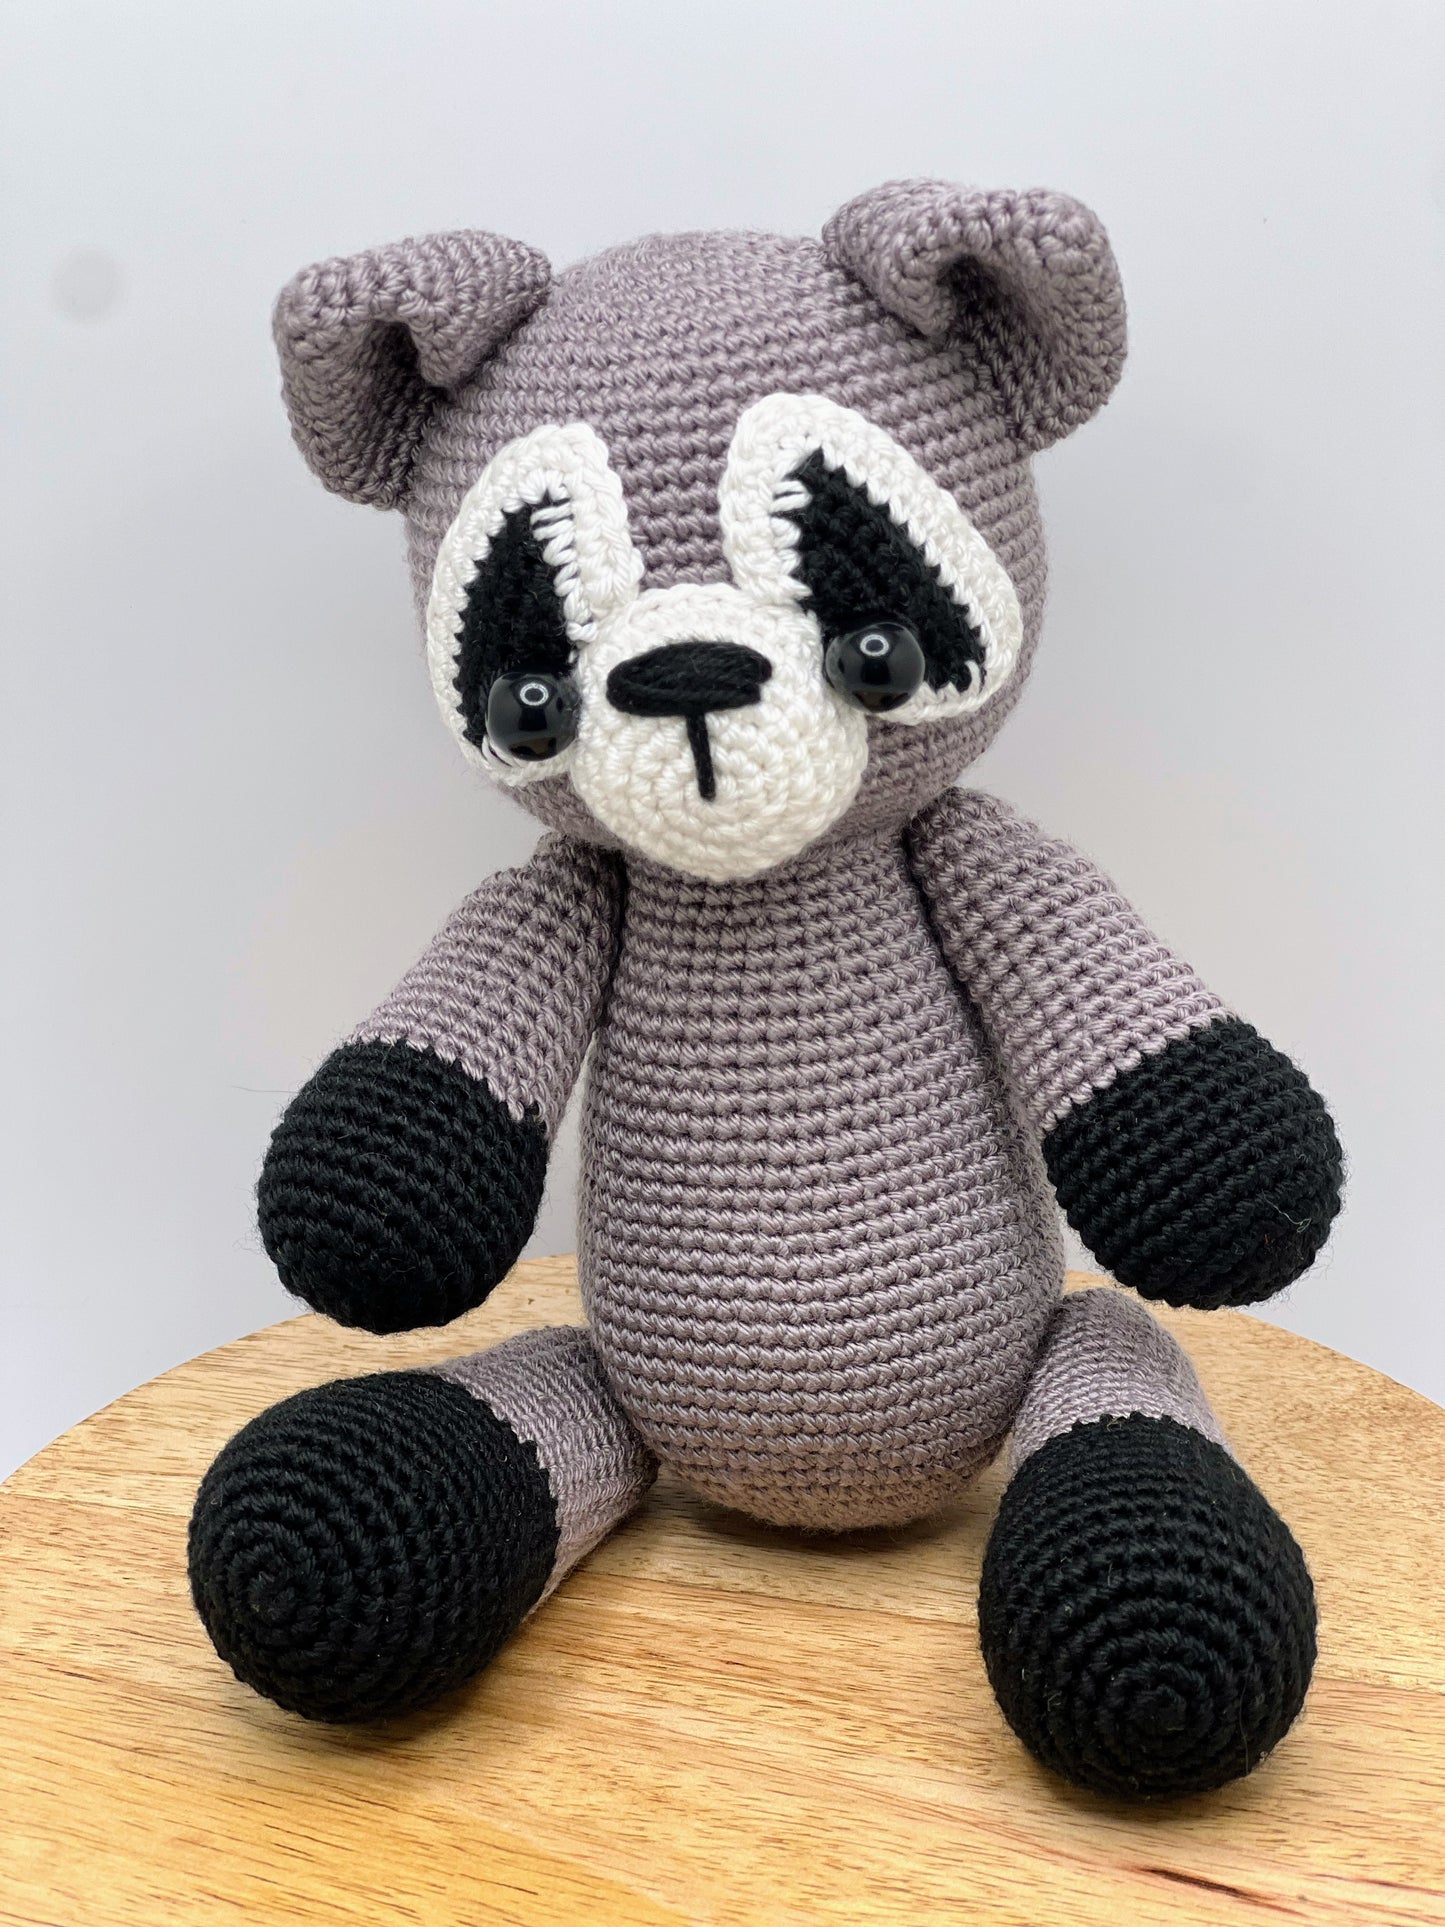 Stuffed Raccoon Toy With Moving Legs - Crochet Knitted Amigurumi Toy